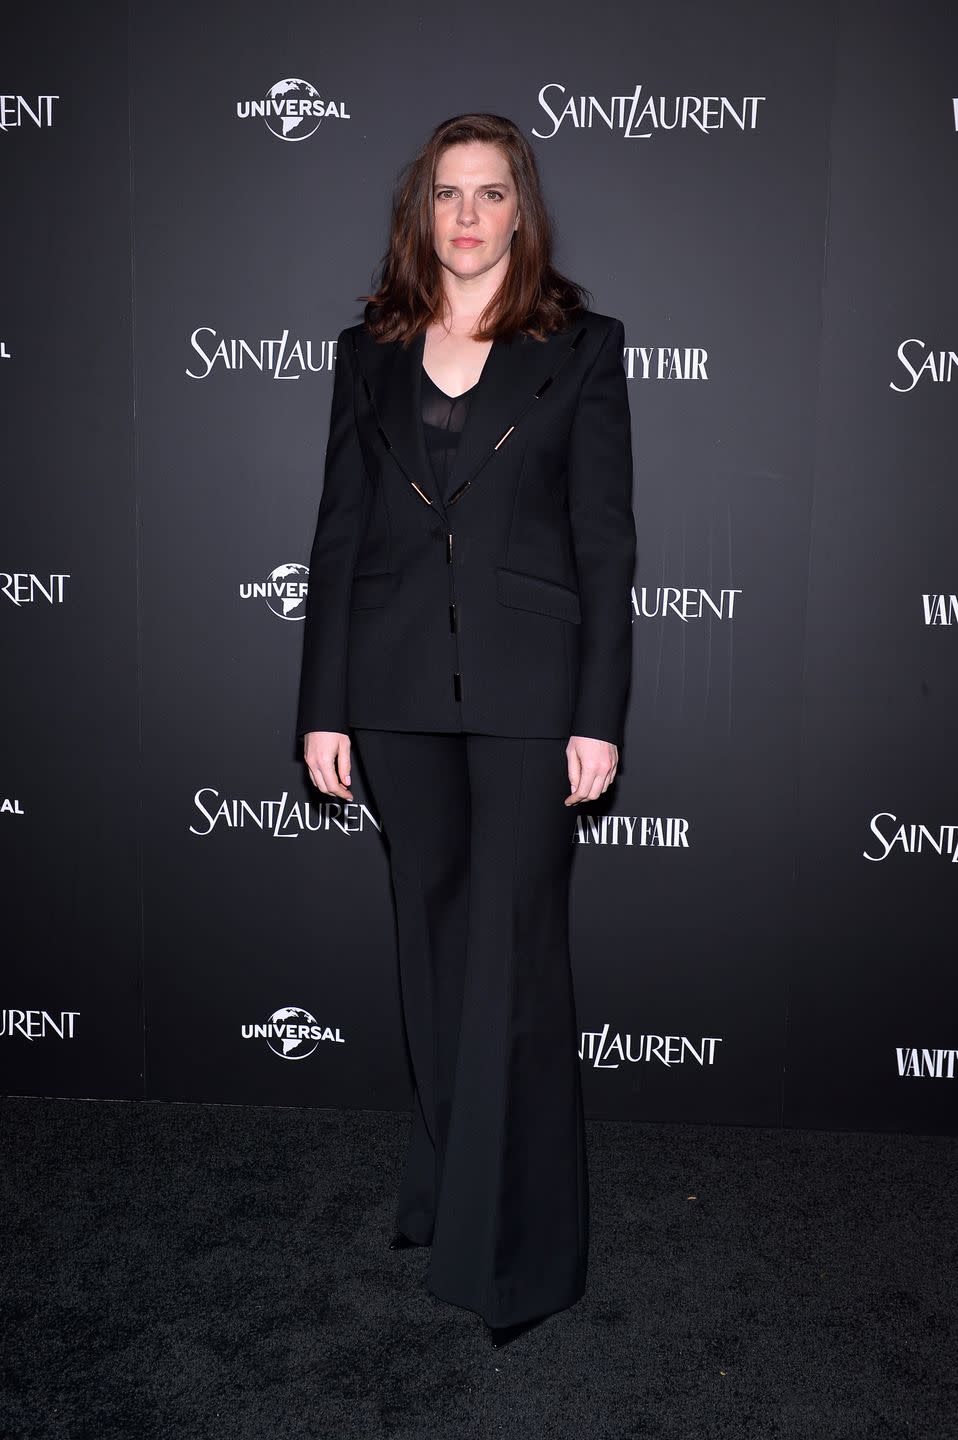 saint laurent x vanity fair x nbcuniversal dinner and party to celebrate